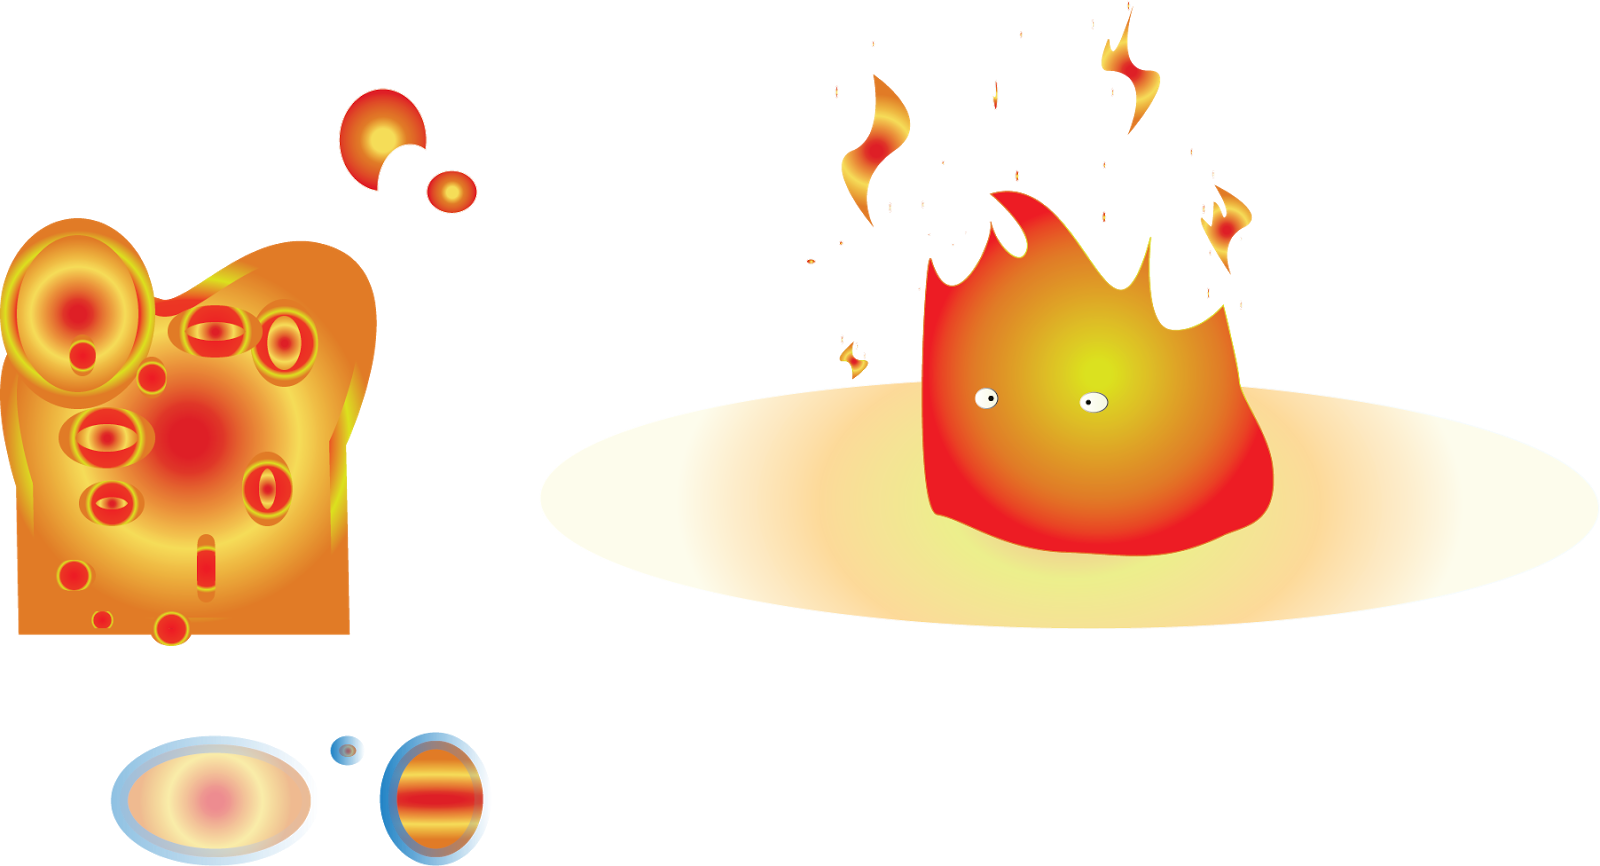 My First Time Using Illustrator Properly And I Somehow - Flame (1600x866)